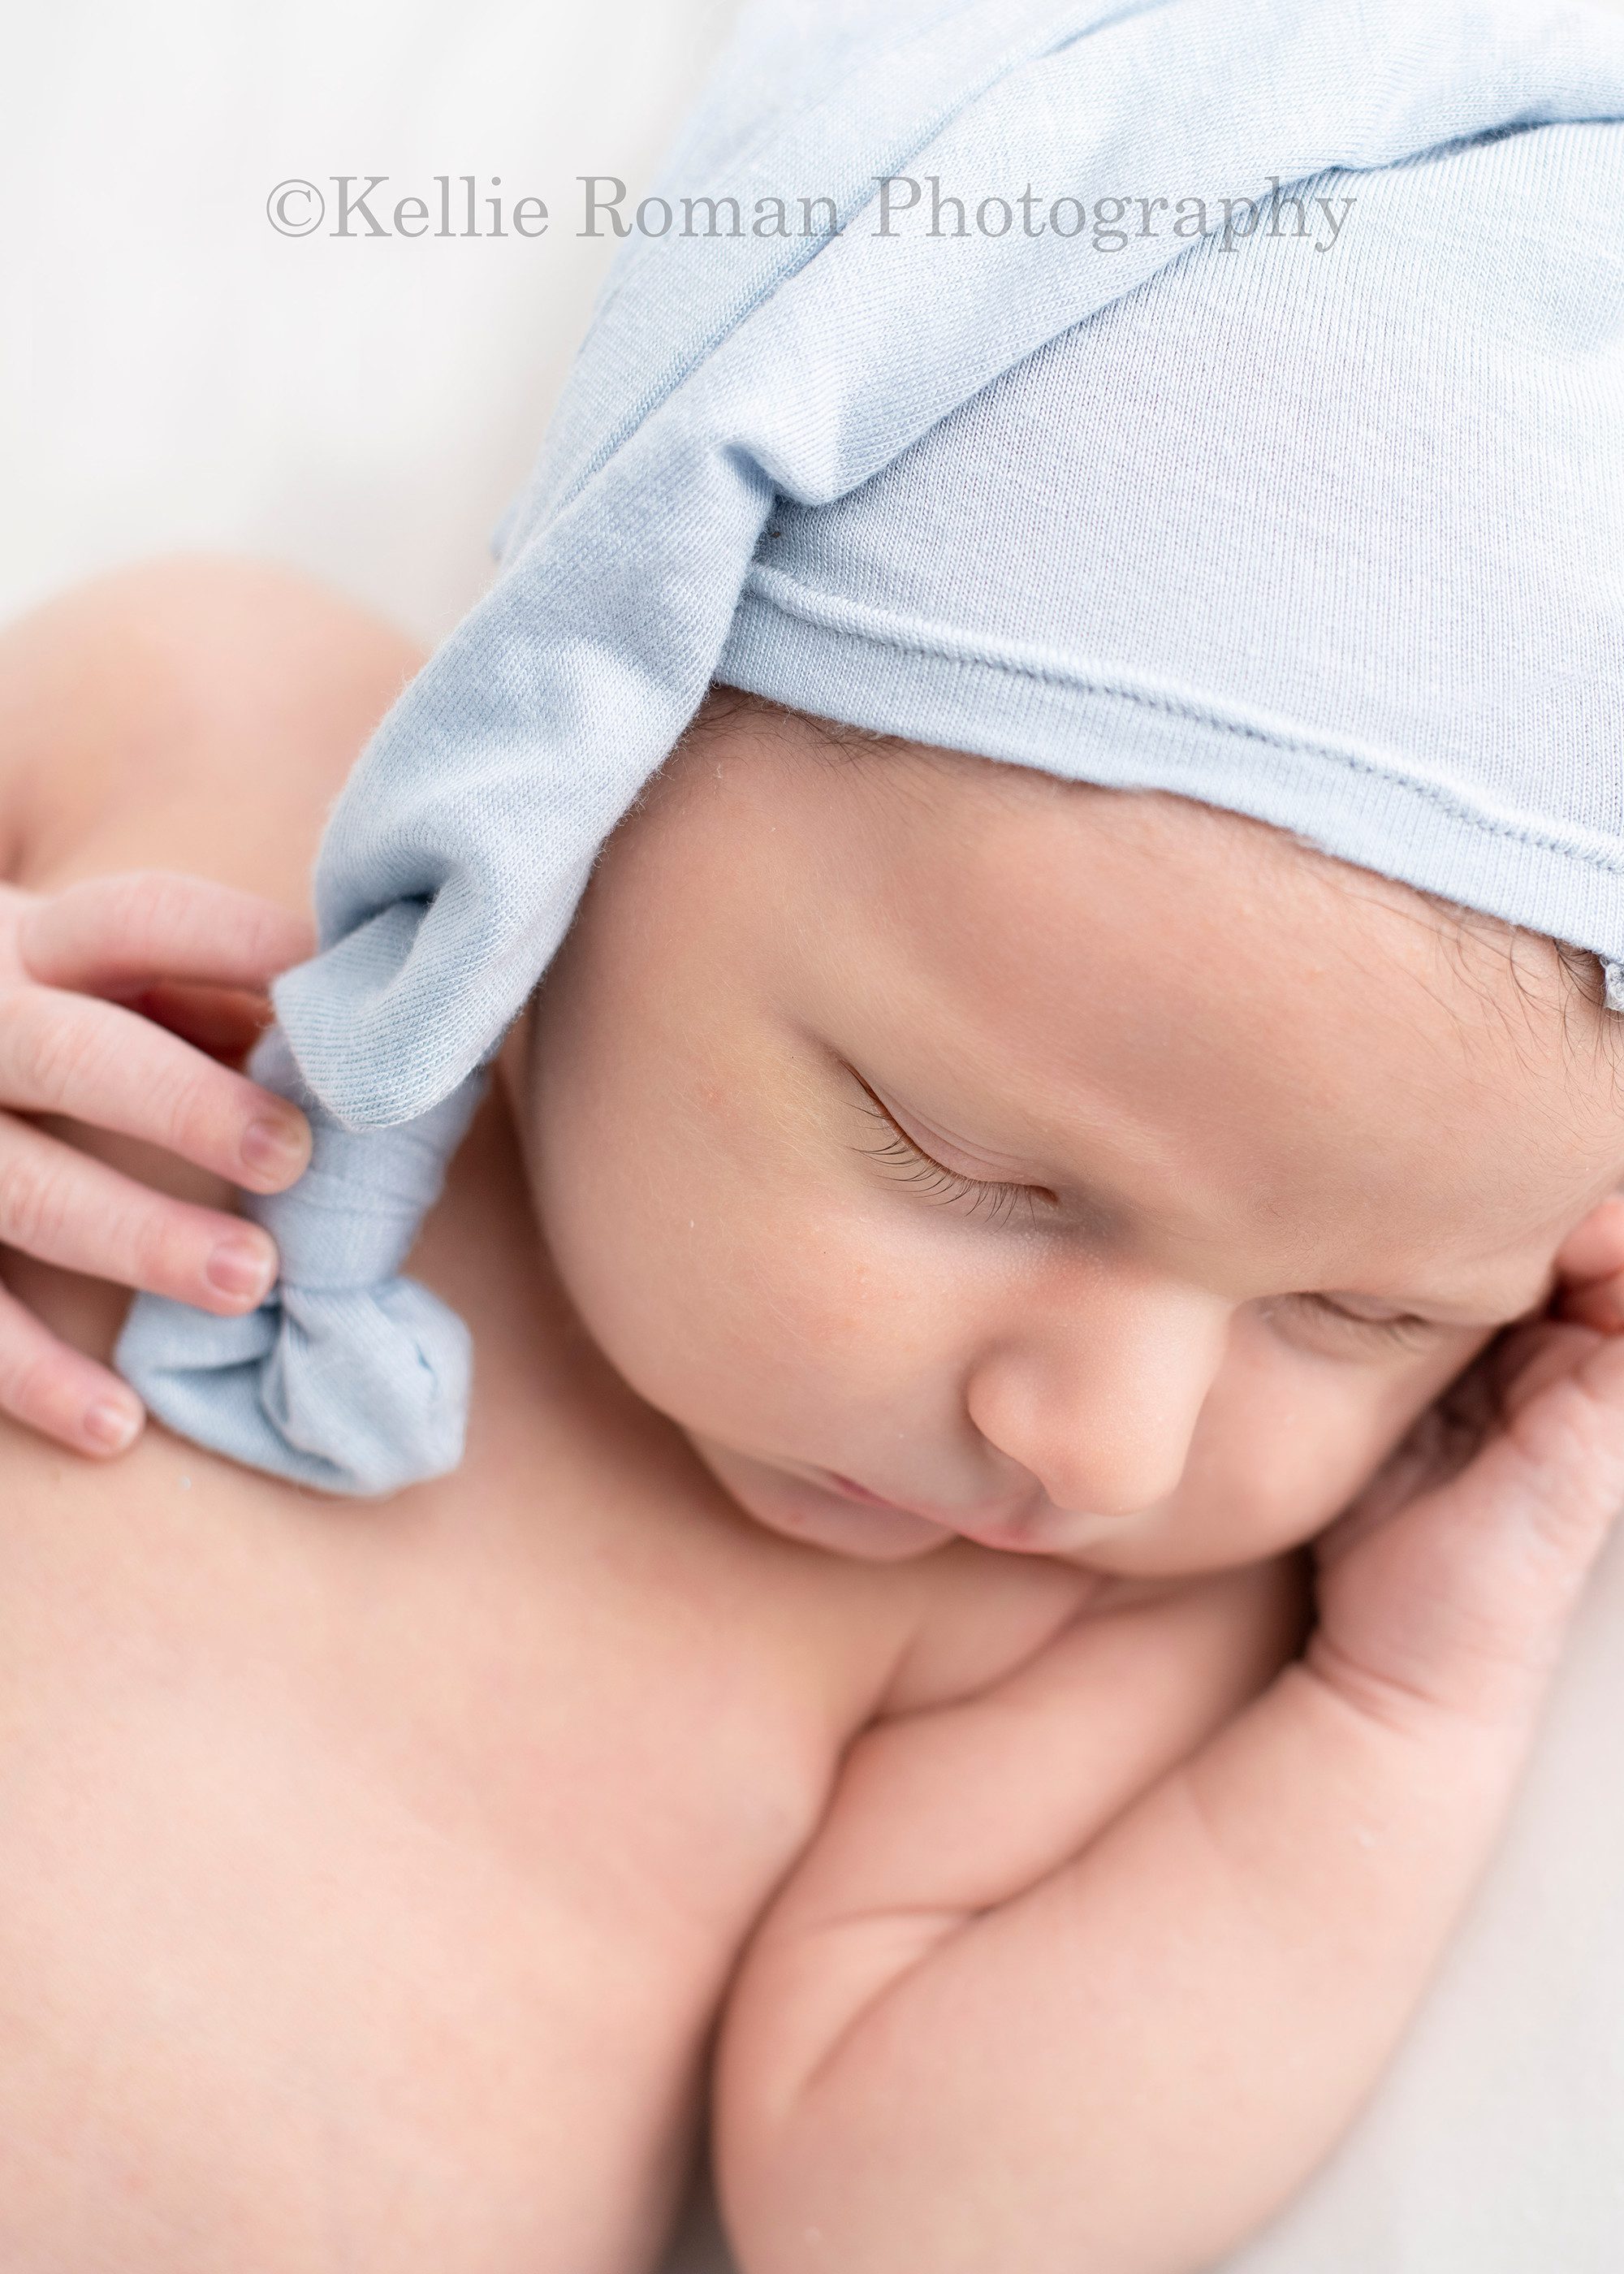 baby pics a newborn boy laying on a cream colored blanket in a milwaukee photography studio he is asleep on his back and has a light blue hat on with a knot at the top of it the shot is a close up of his face and hand